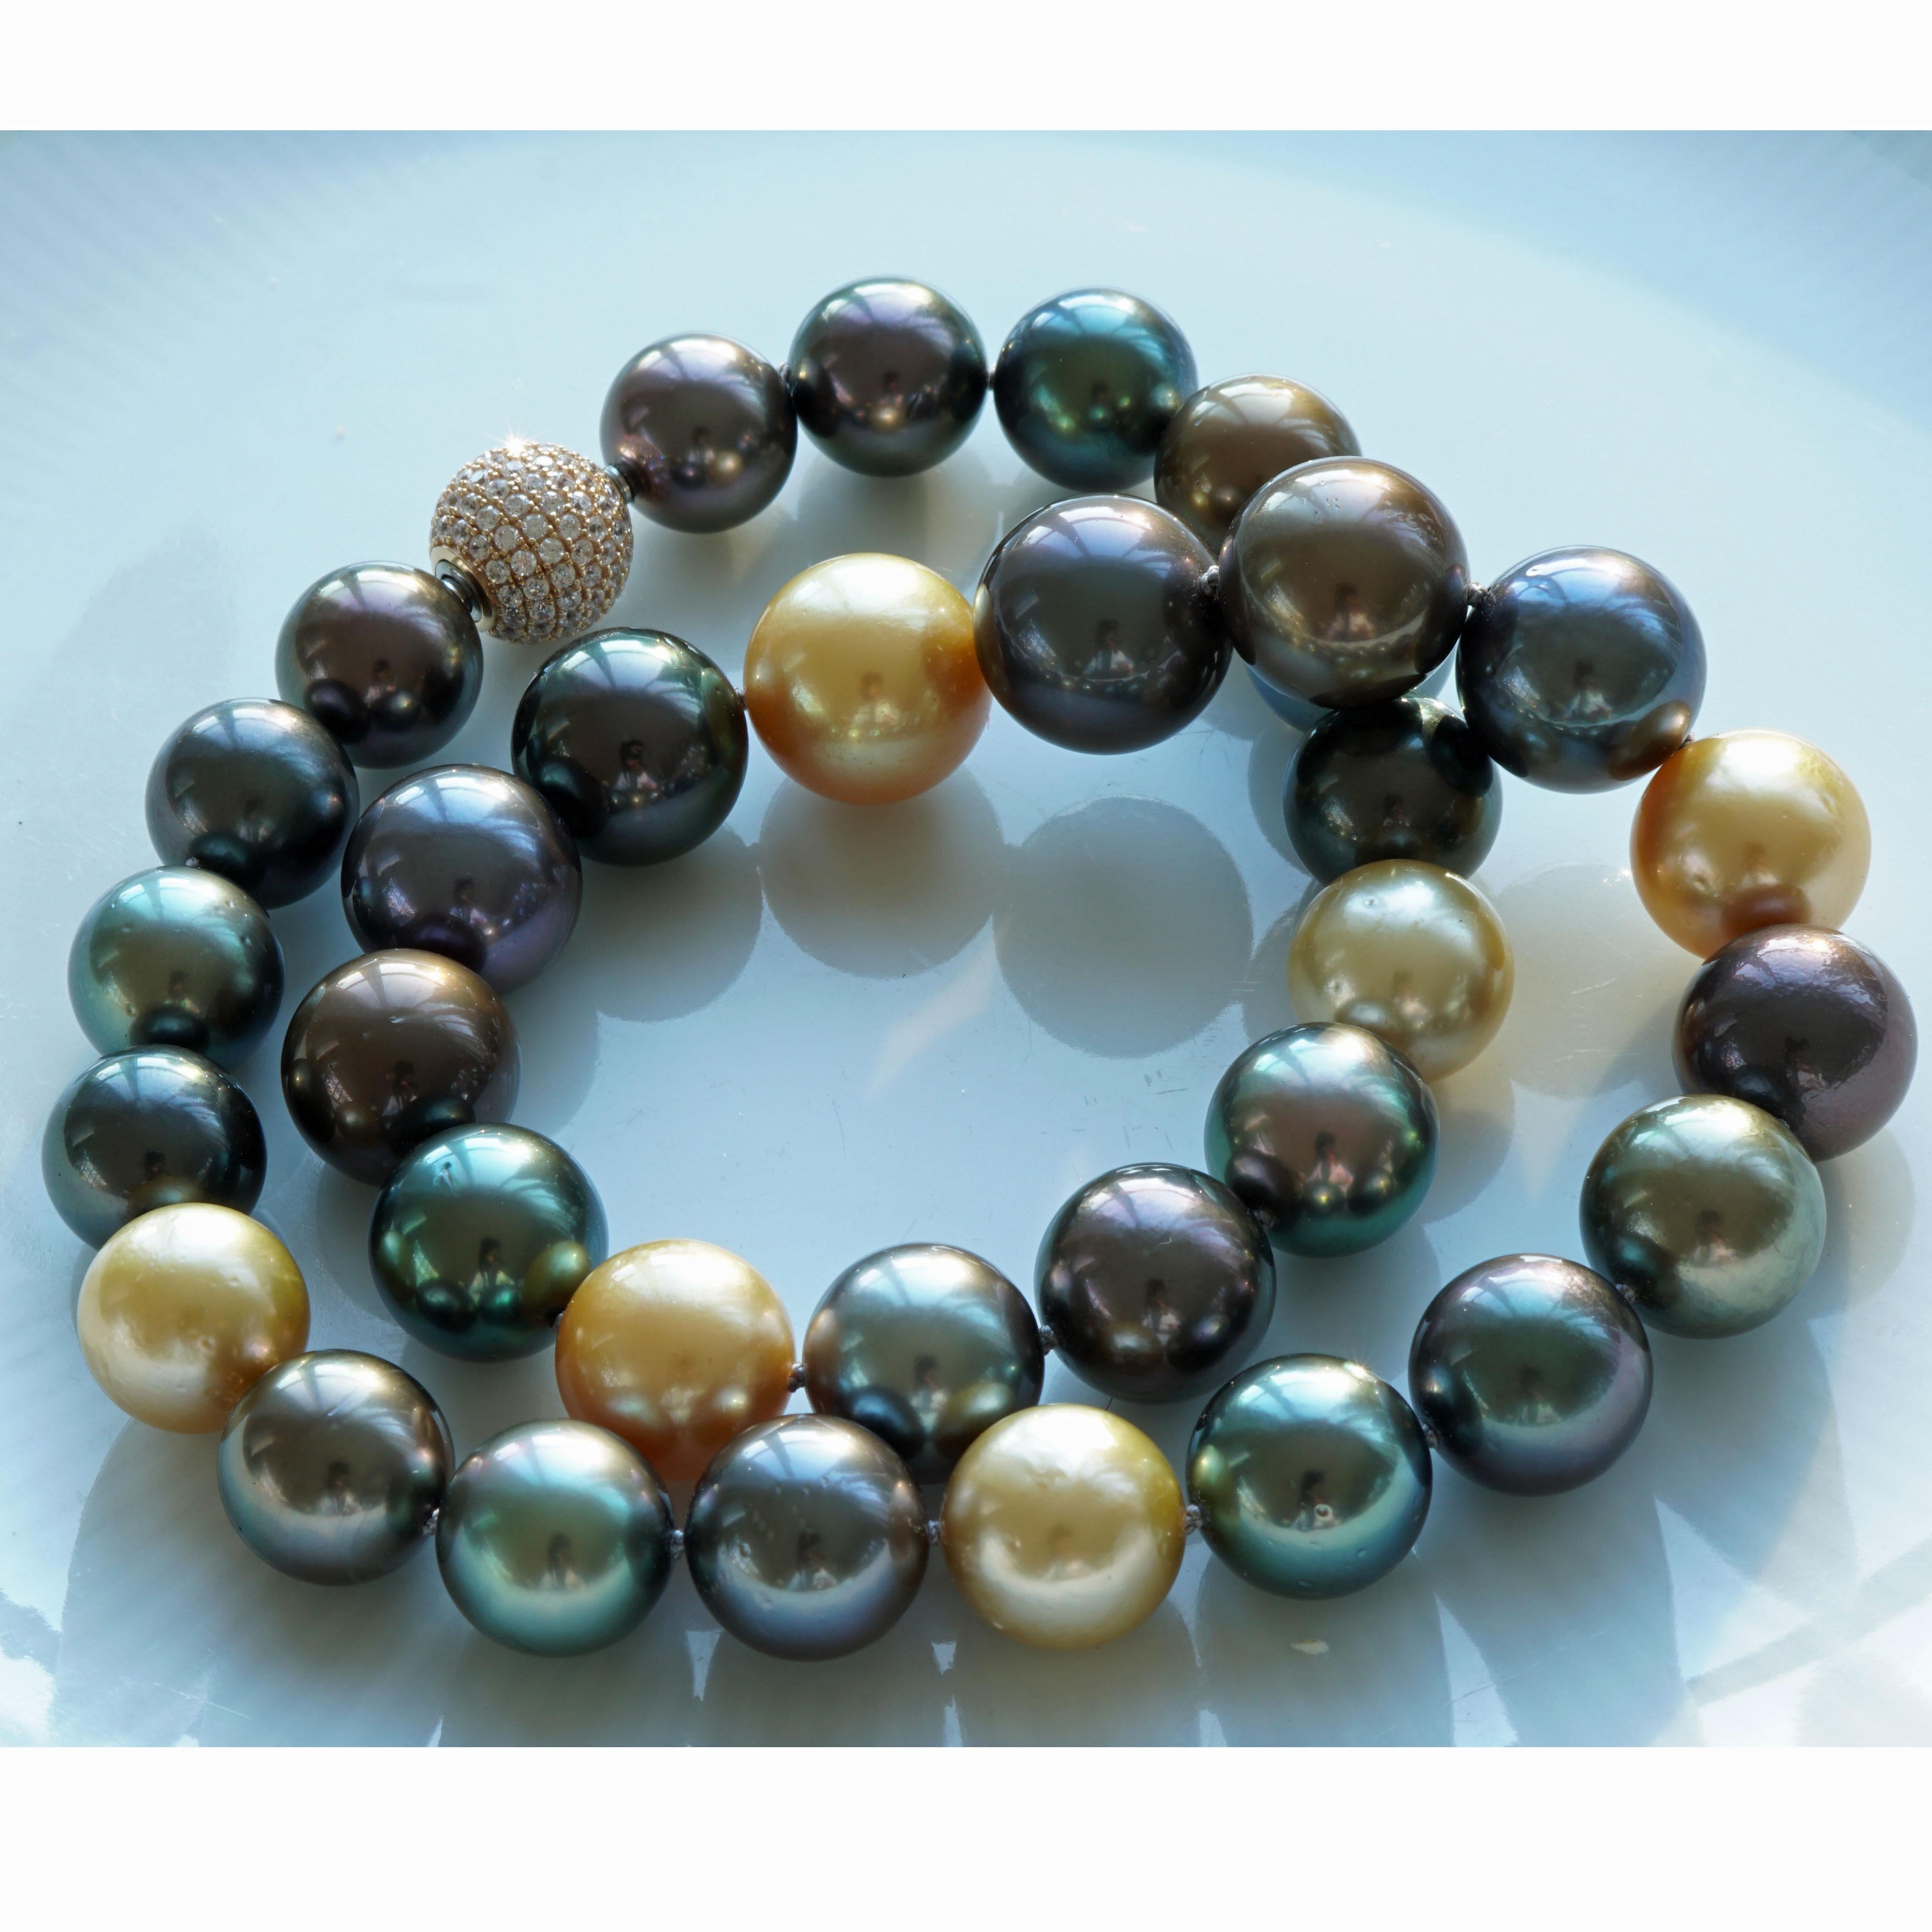 AAA+ Tahiti Southsea Necklace Wow What Colors Gold Mocha Pistachio Grey 12-15 mm For Sale 3